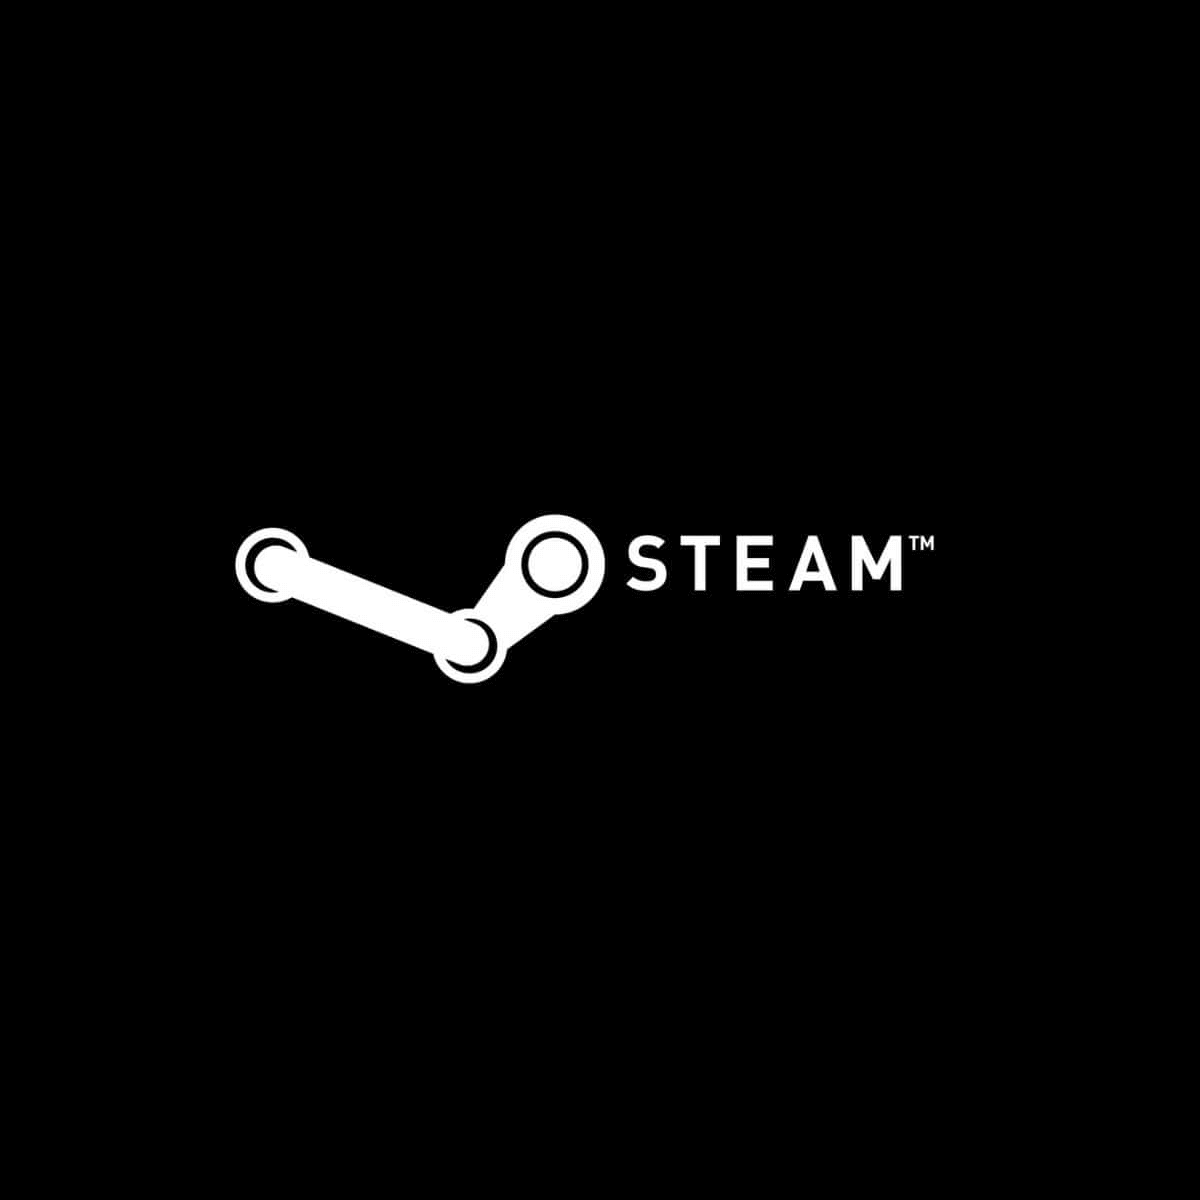 fatal error failed to connect with local steam client process